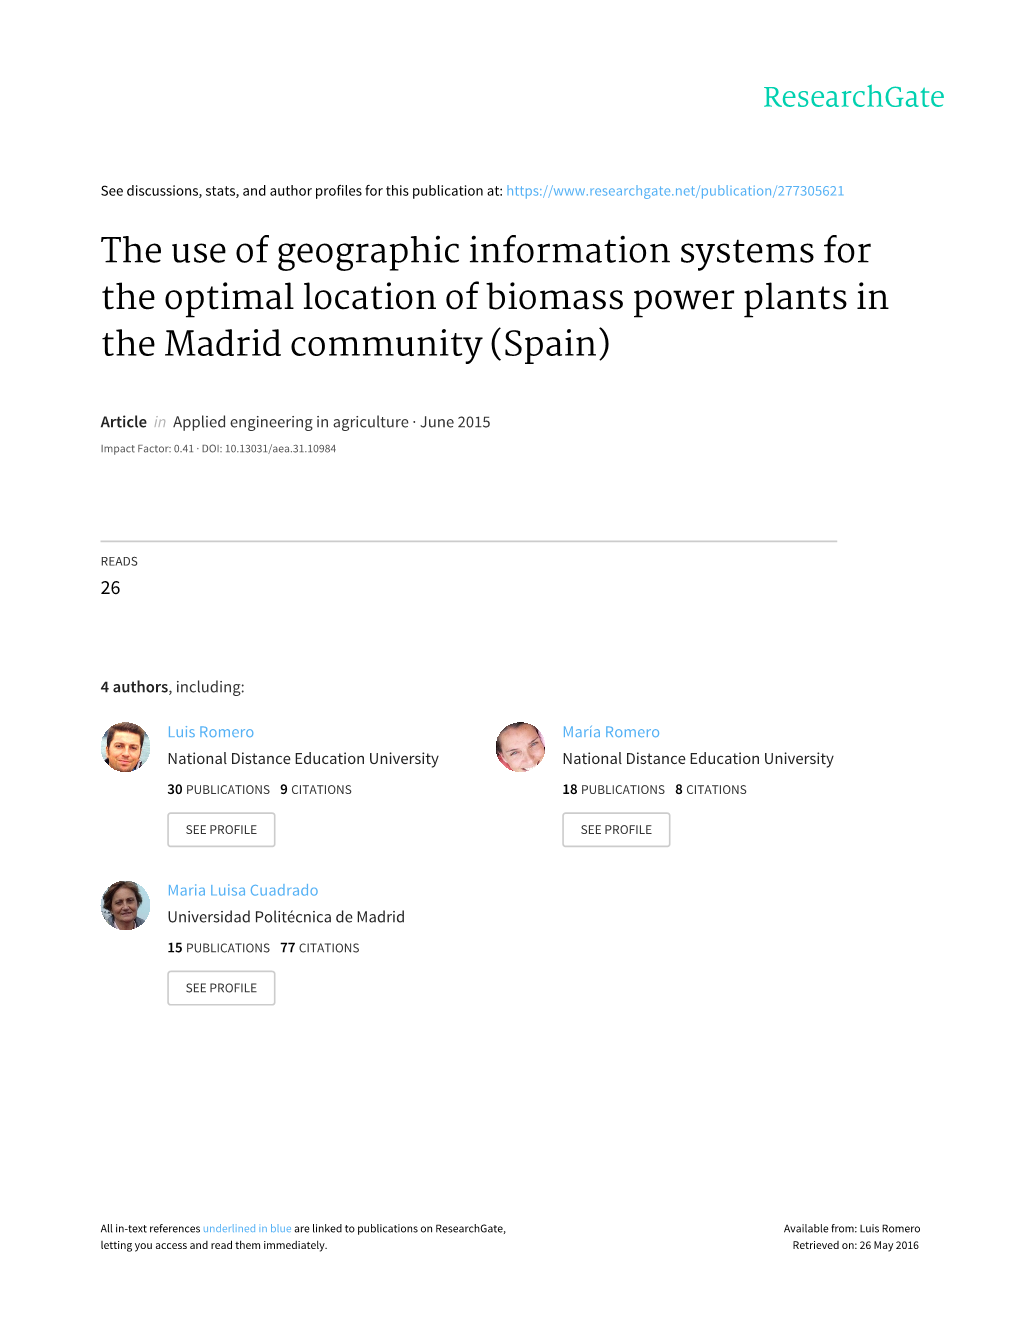 The Use of Geographic Information Systems for the Optimal Location of Biomass Power Plants in the Madrid Community (Spain)